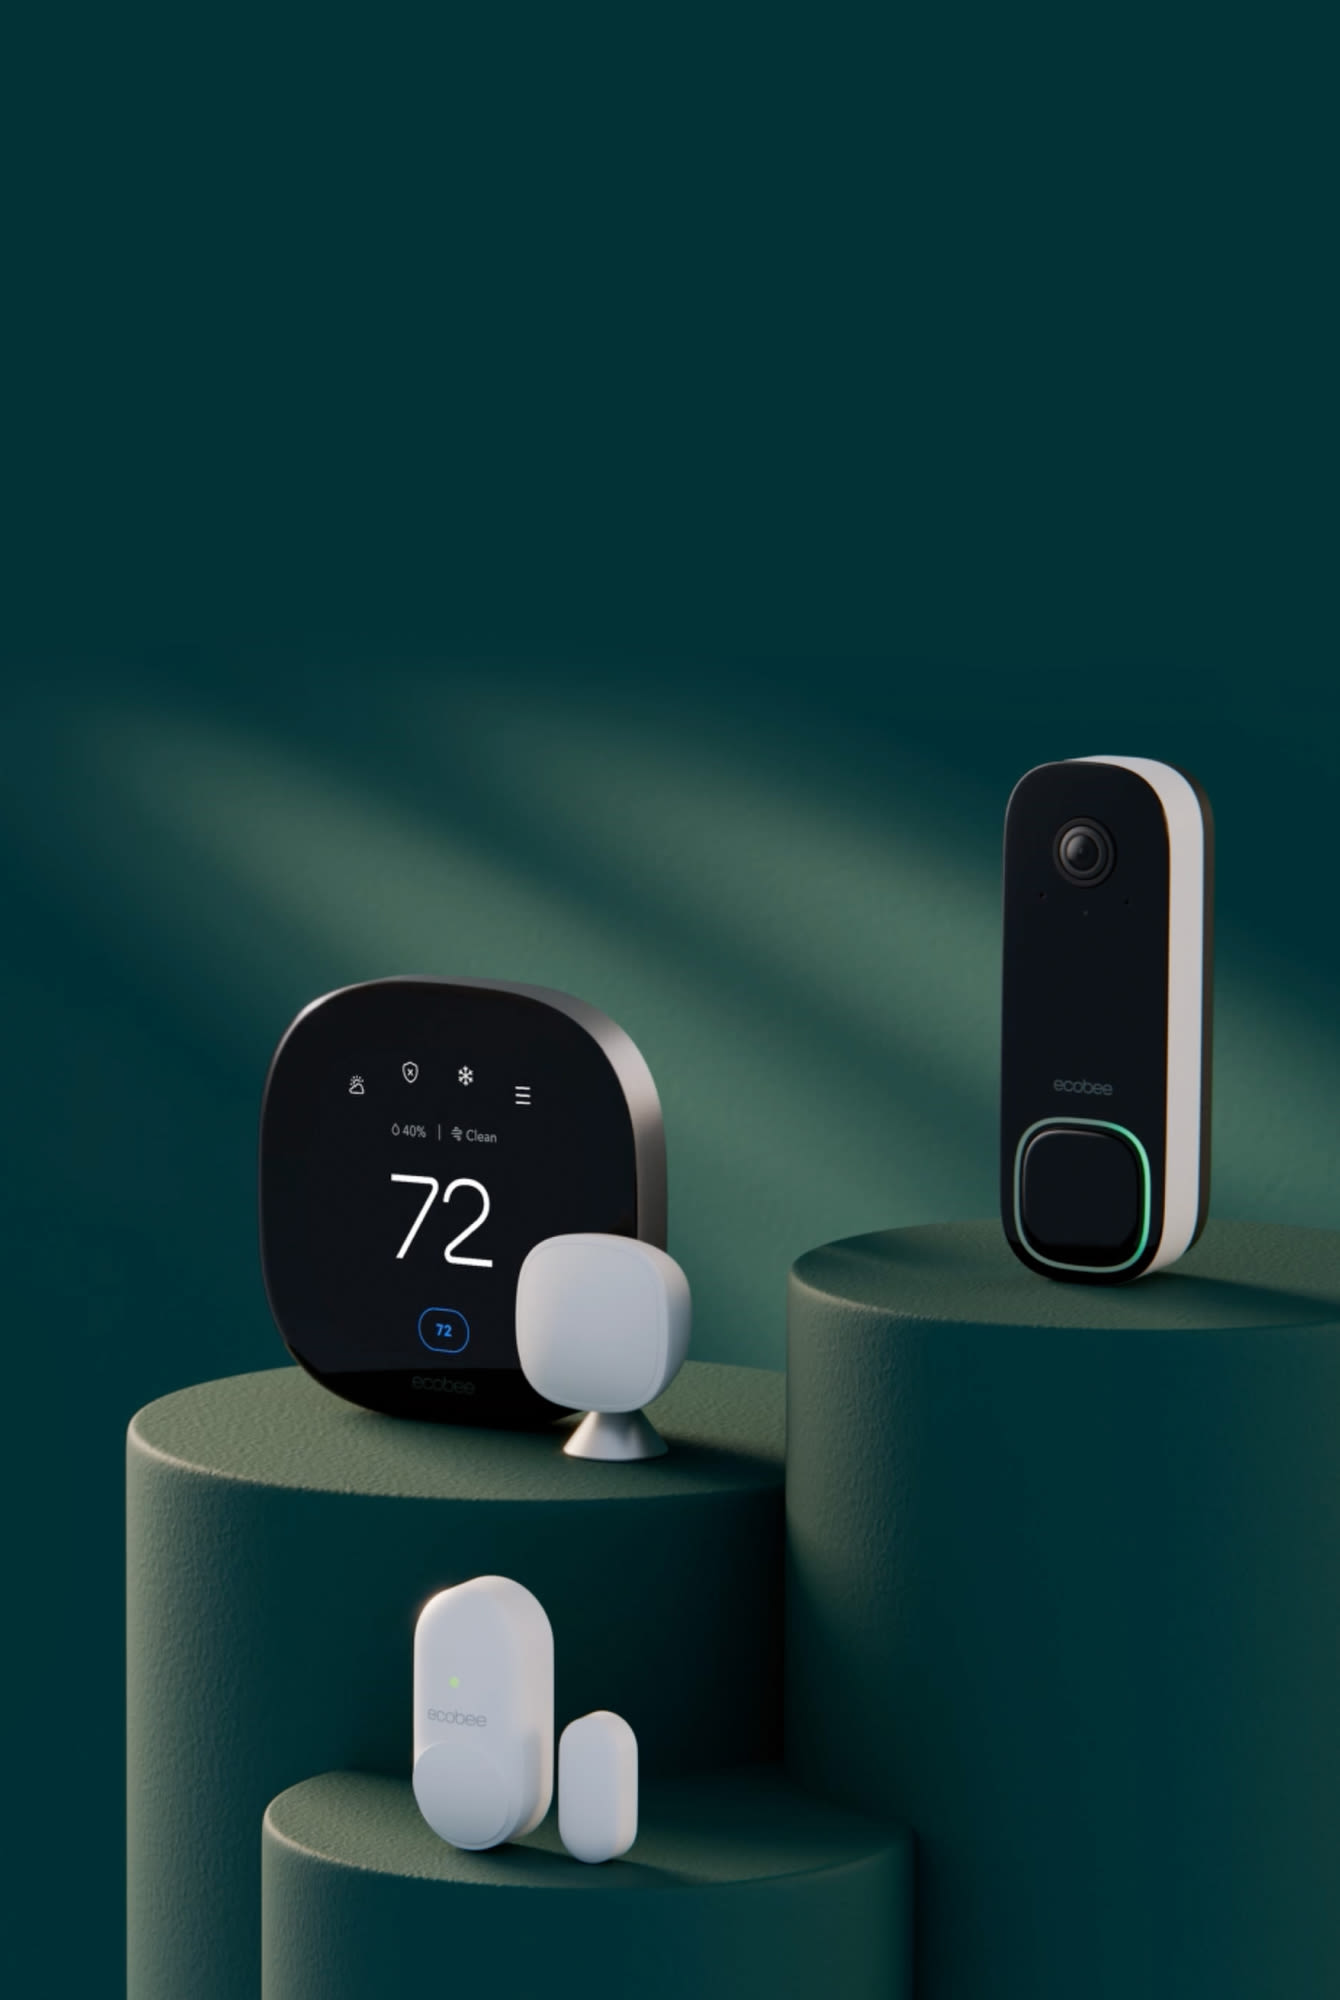 A smart thermostat with room sensor, a doorbell camera, and a contact sensor sit on three raised platforms on a dark green background.